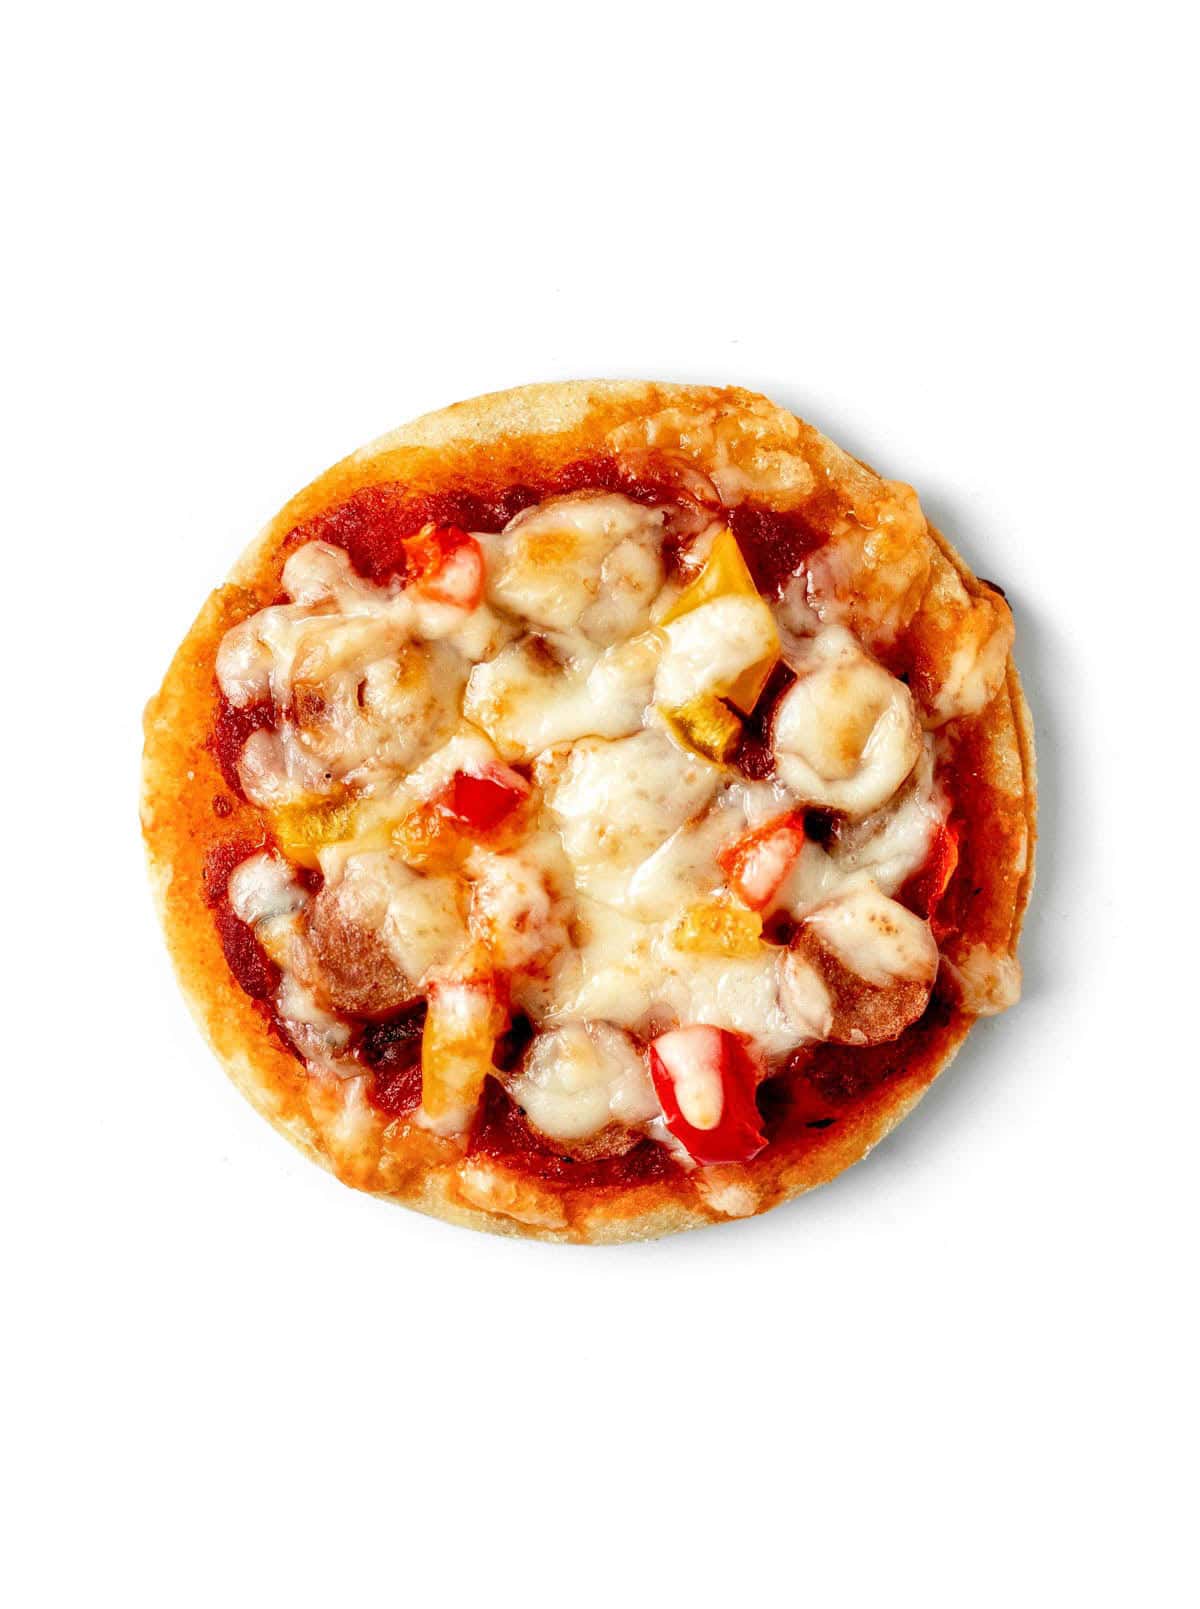 A healthy air fryer mini pizza on a white background.